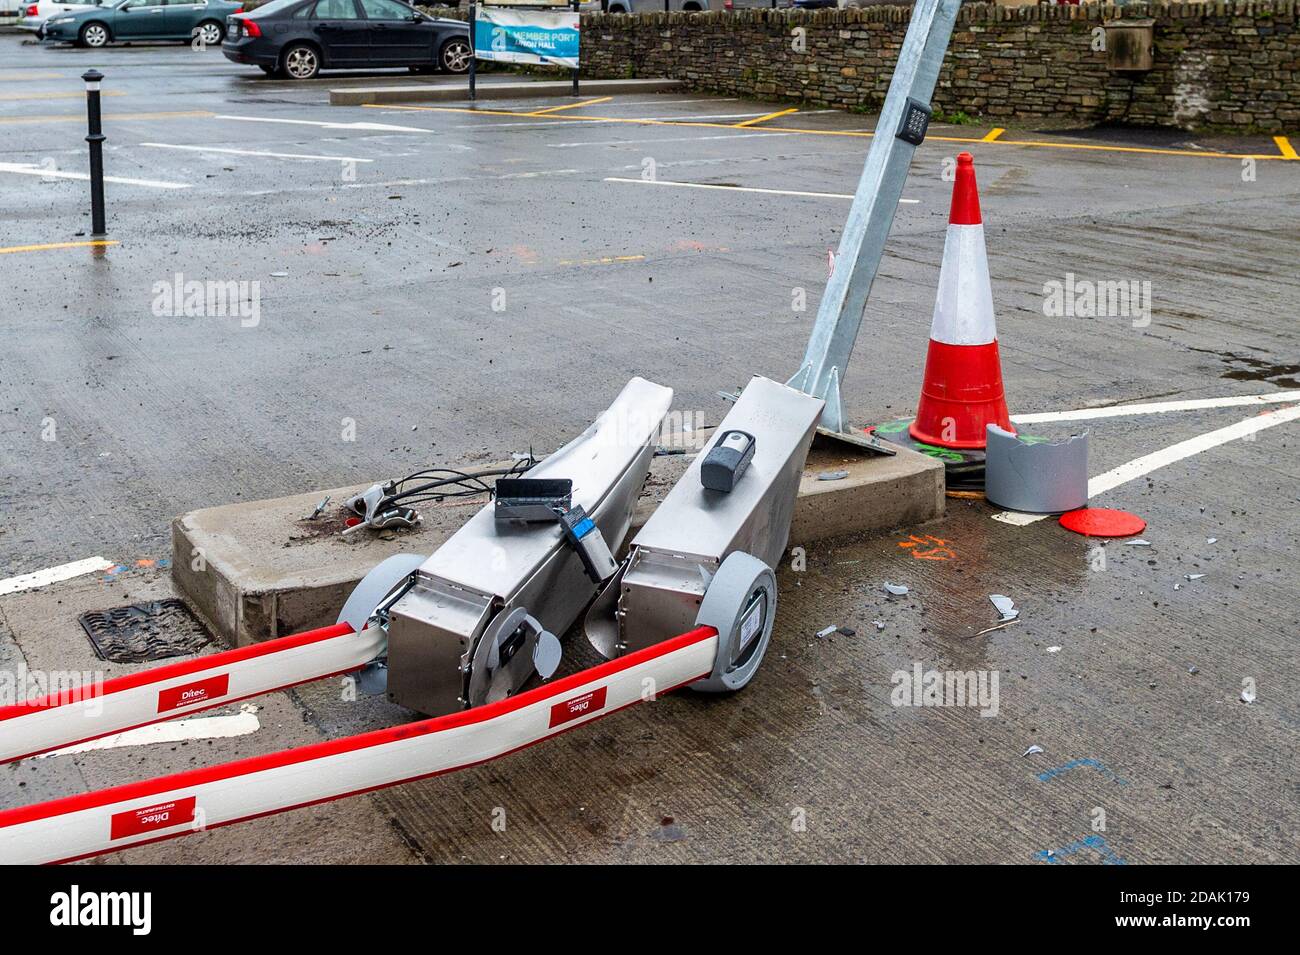 Union Hall, West Cork, Ireland. 13th Nov, 2020. The newly installed access barrier at Keelbeg Pier, Union Hall was destroyed last night. It is understood a van hit the barrier, causing approx. €10,000 worth of damage. Credit: AG News/Alamy Live News Stock Photo